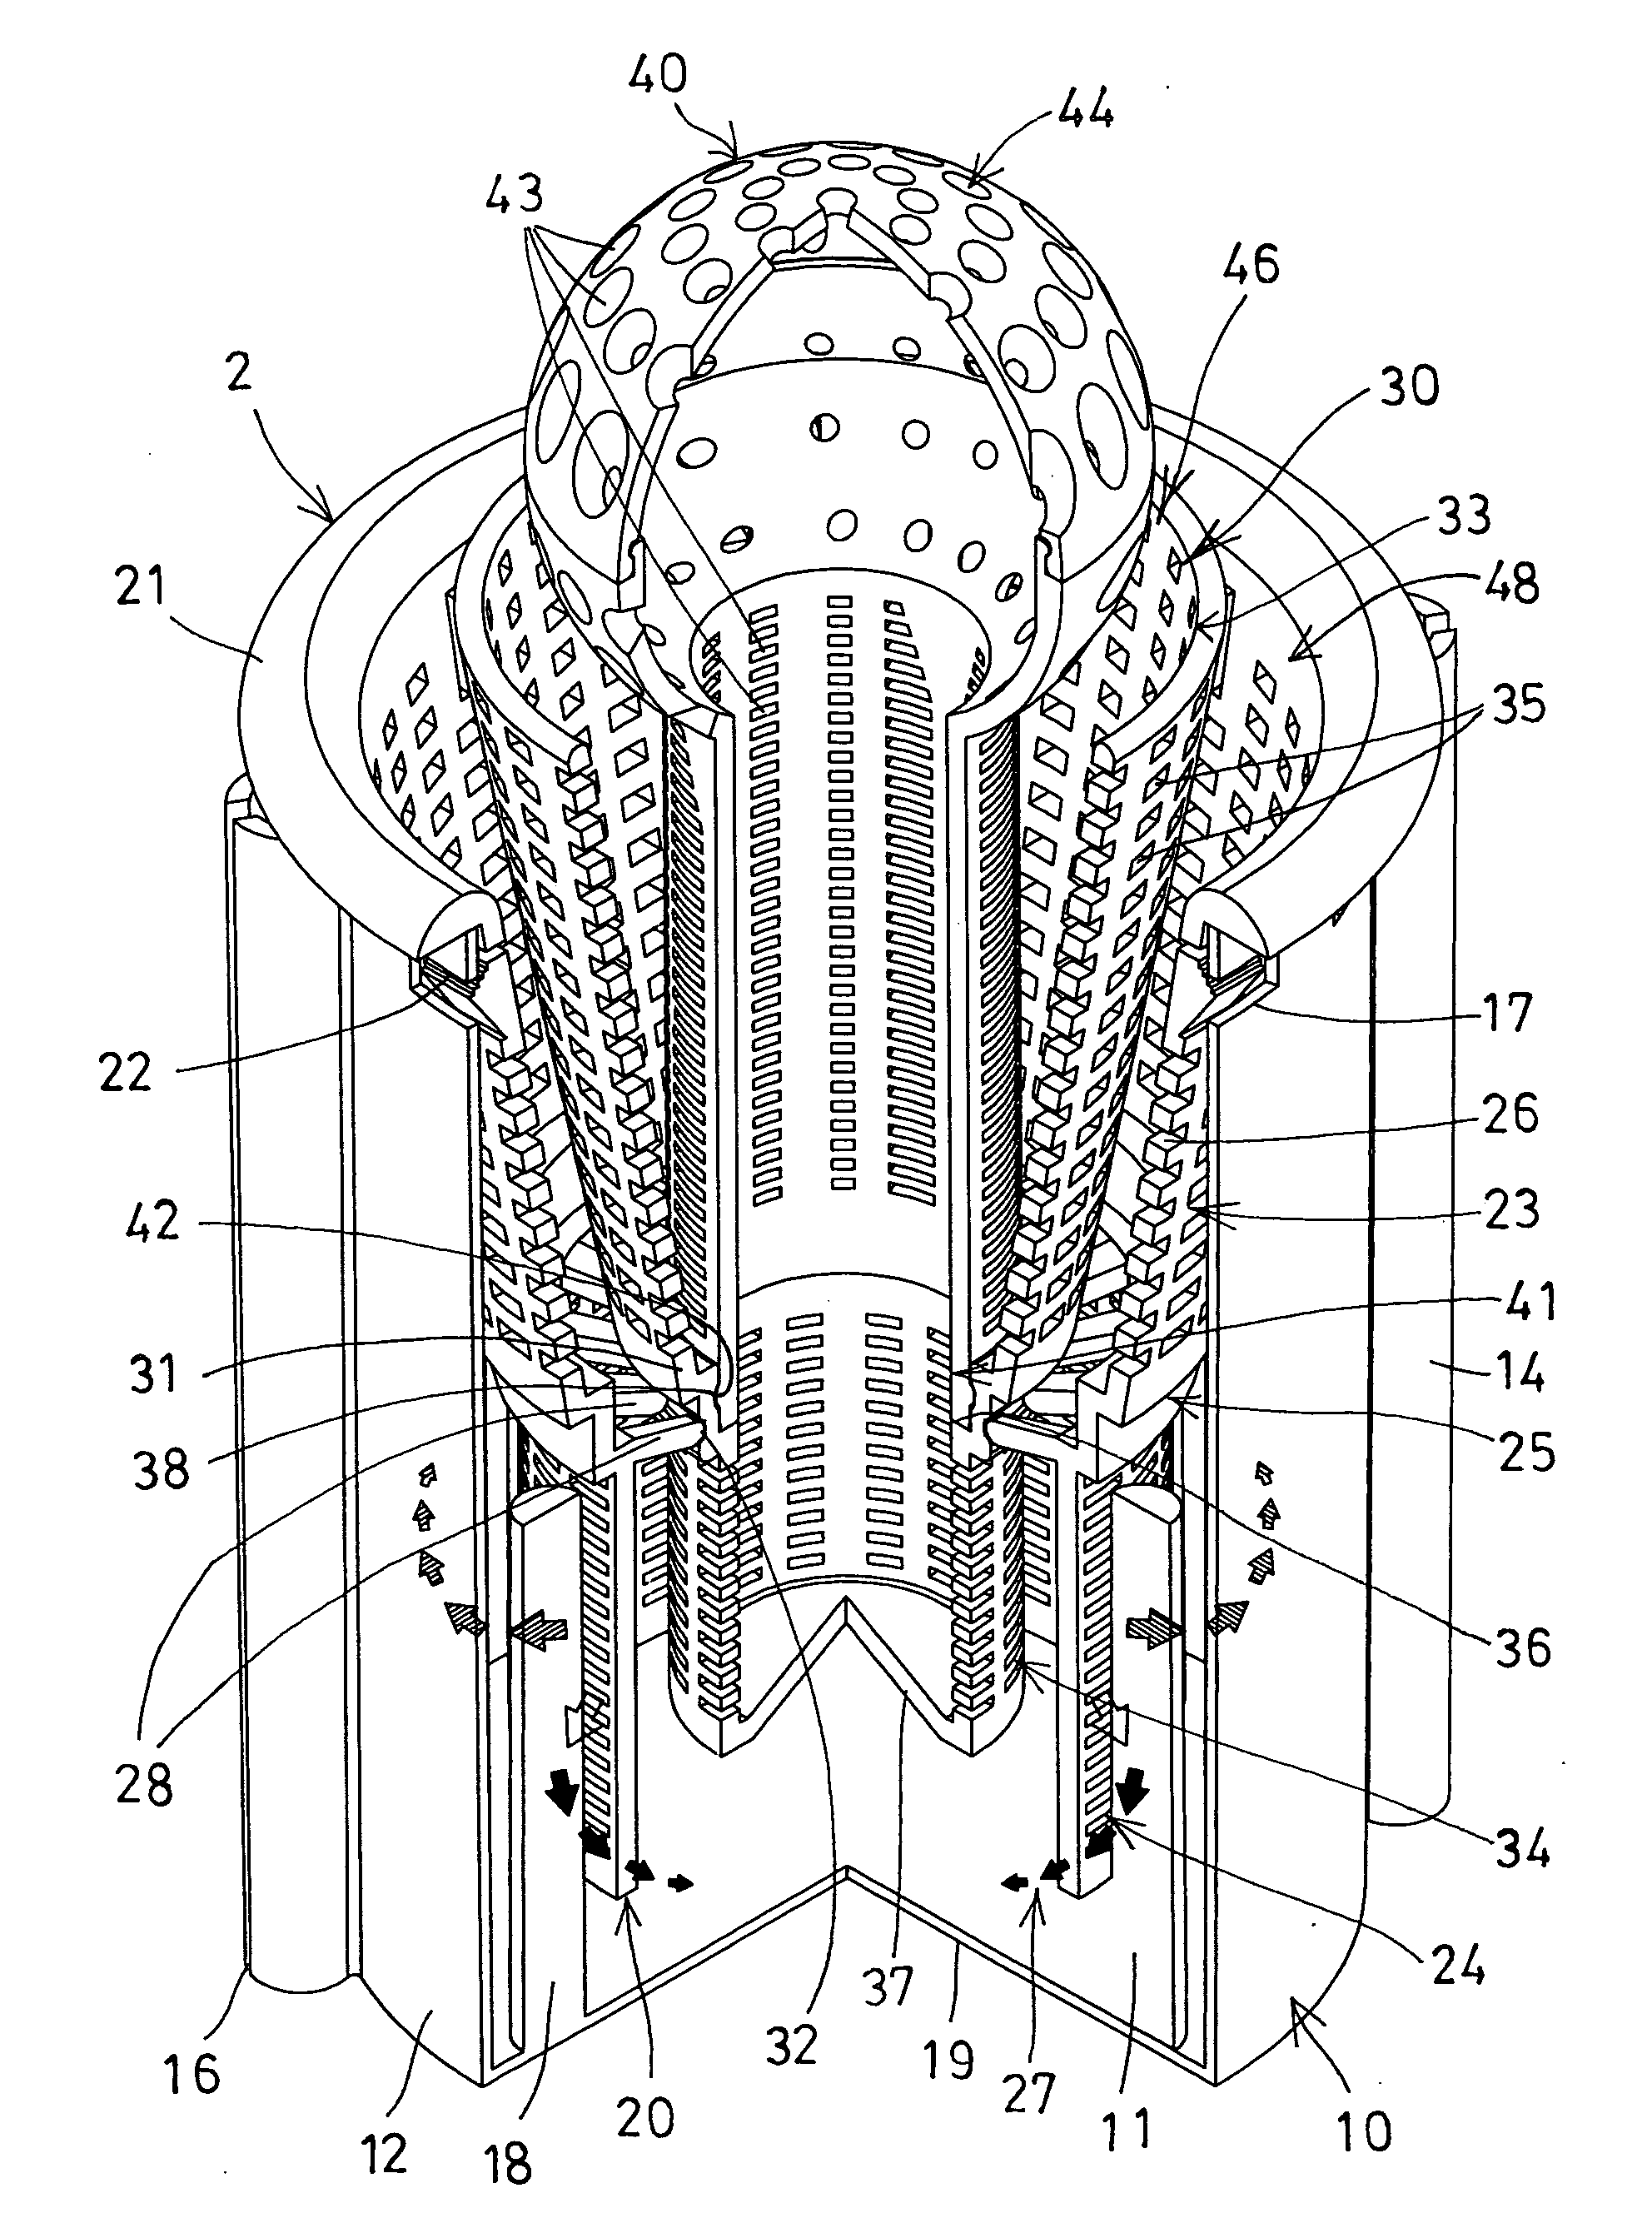 Acoustic absorbing device